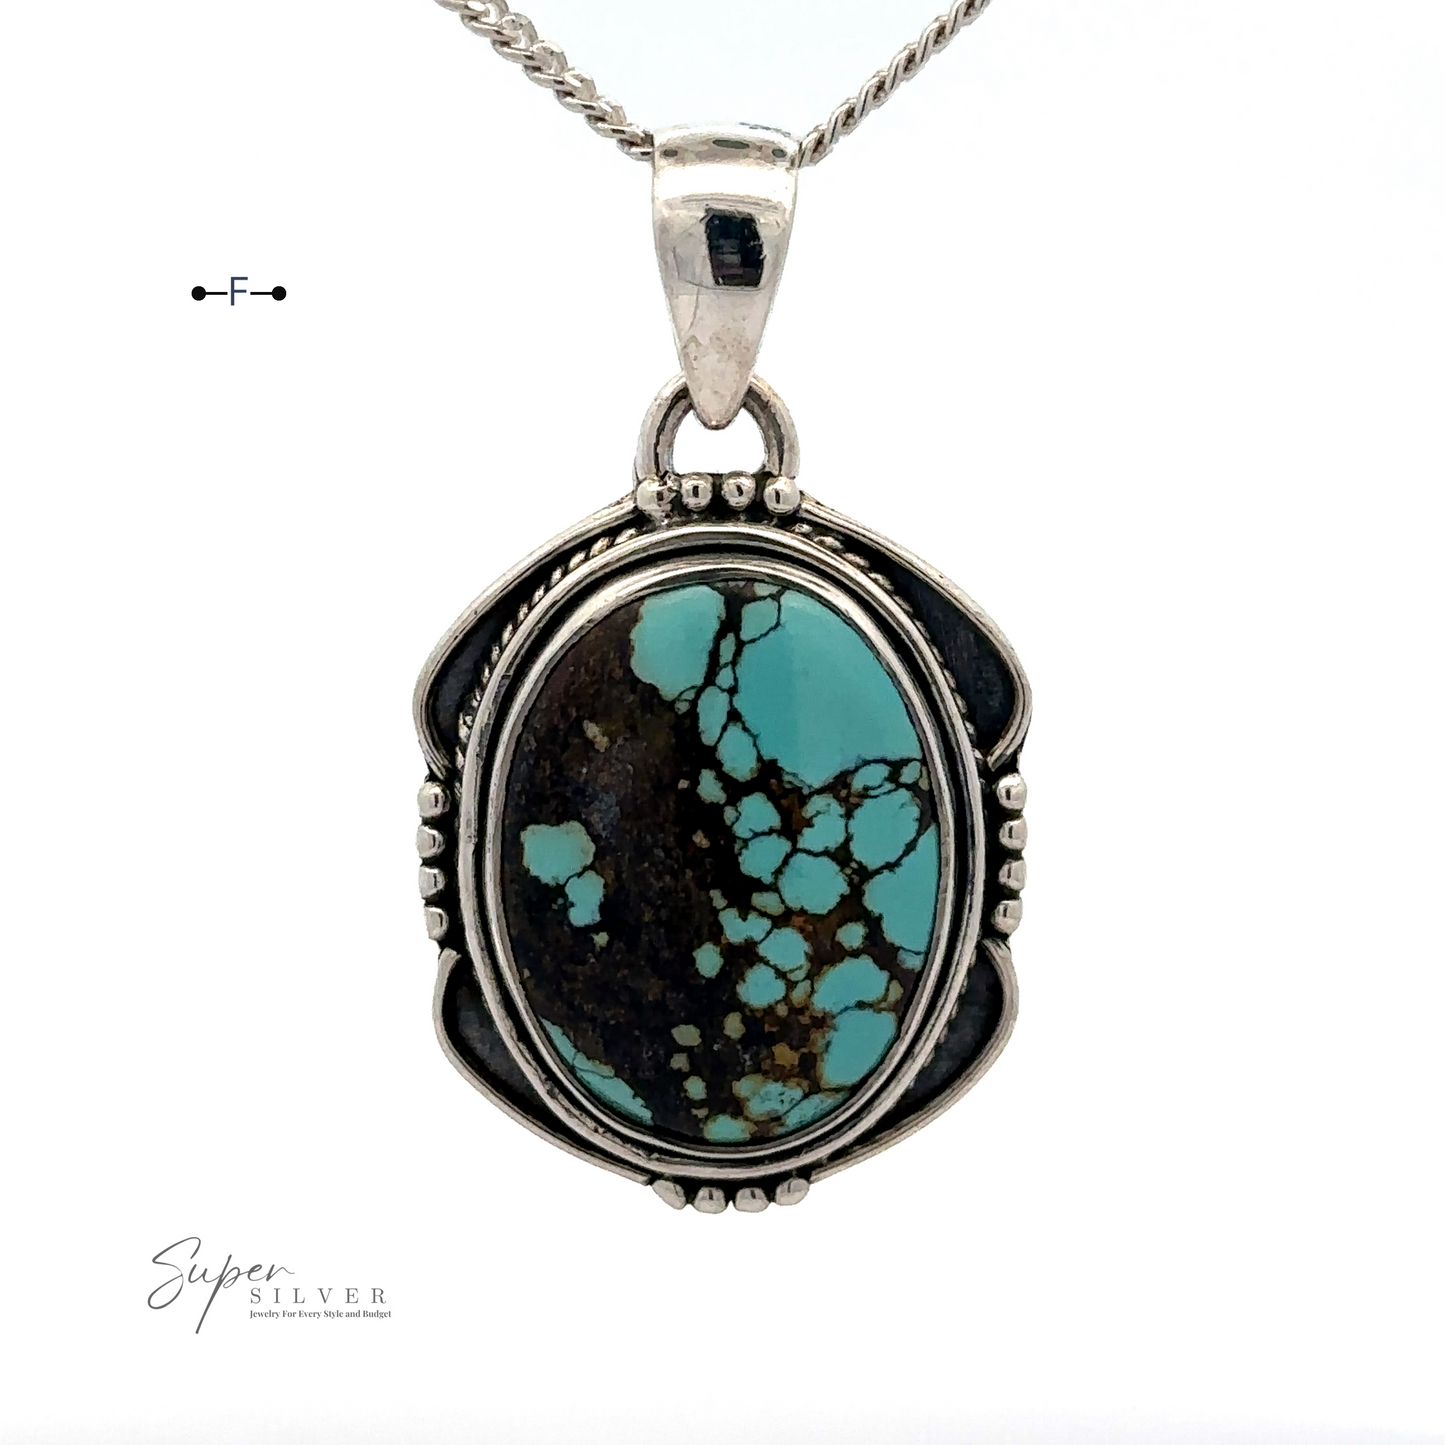 
                  
                    A Natural Turquoise Pendant with an Oval Shield Setting featuring an oval natural turquoise stone with black veins, attached to a .925 sterling silver chain.
                  
                